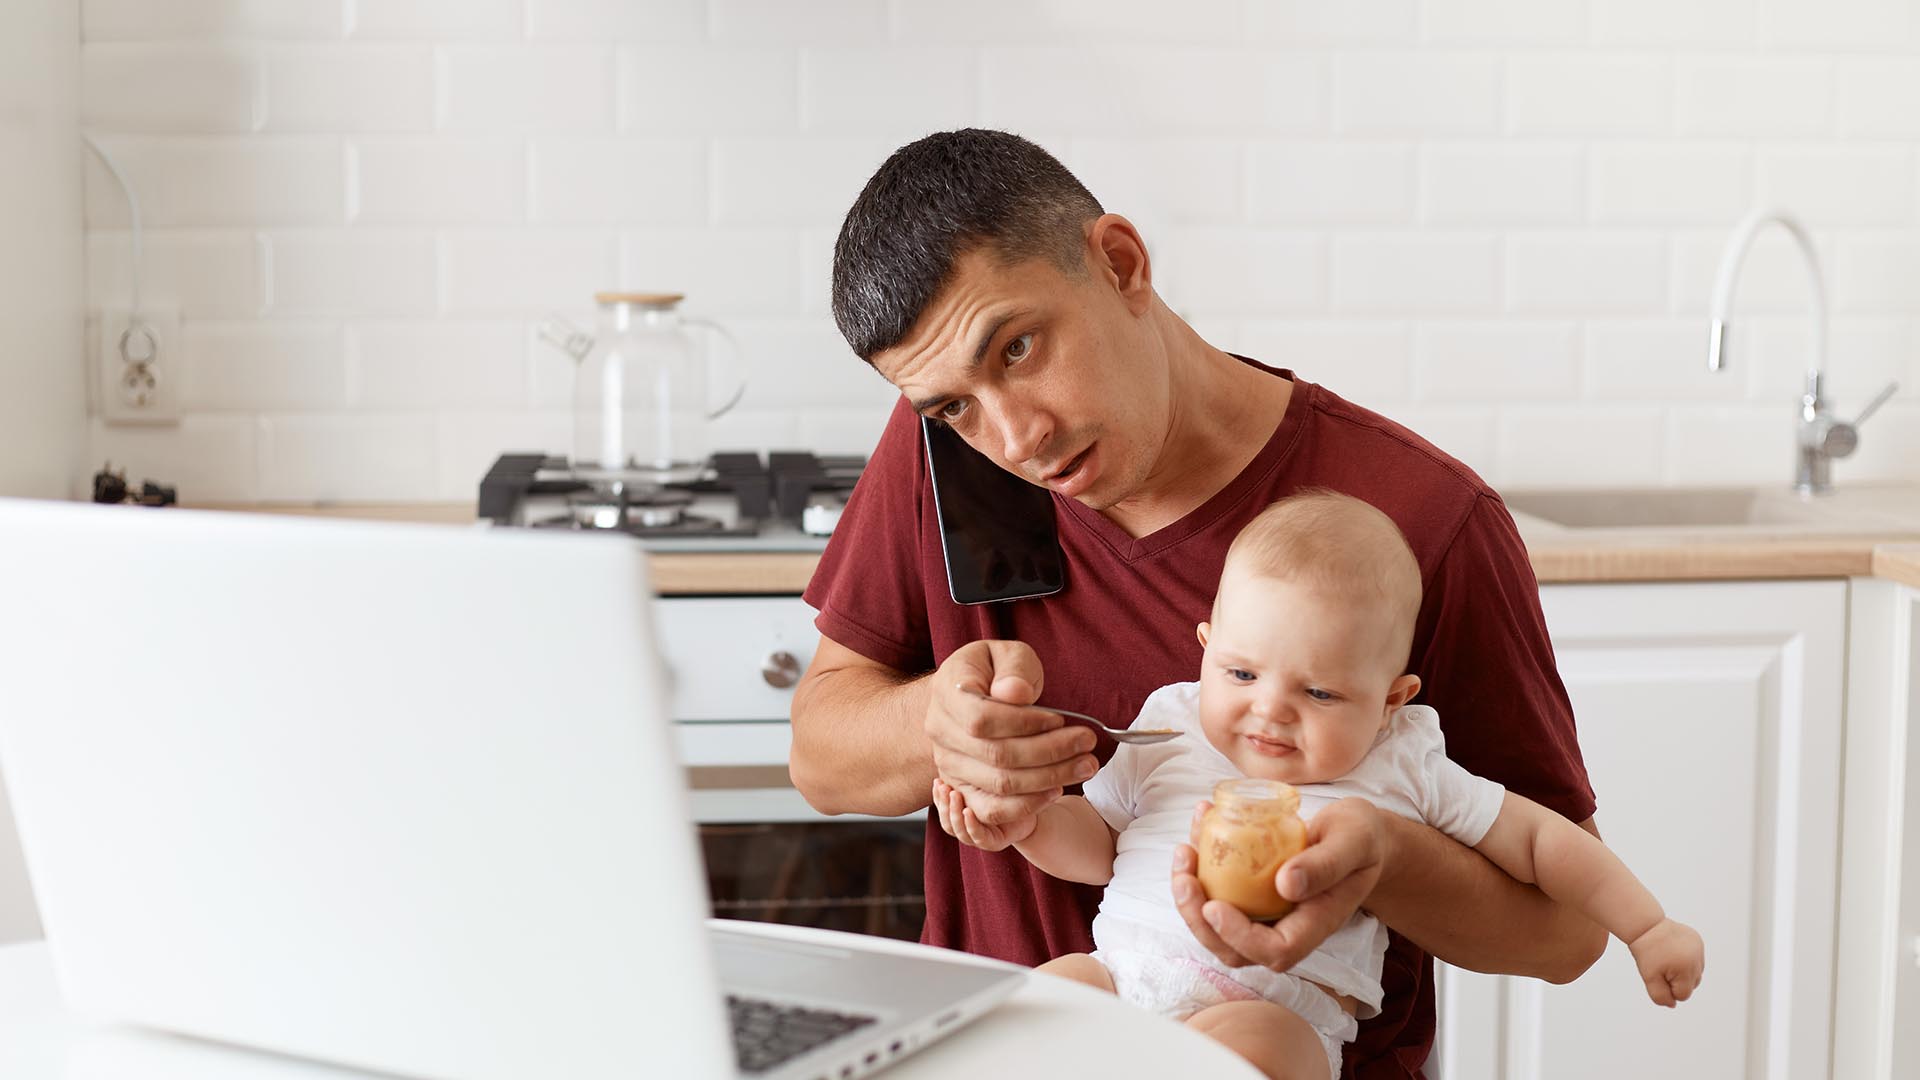 Father feeding child while on the phone